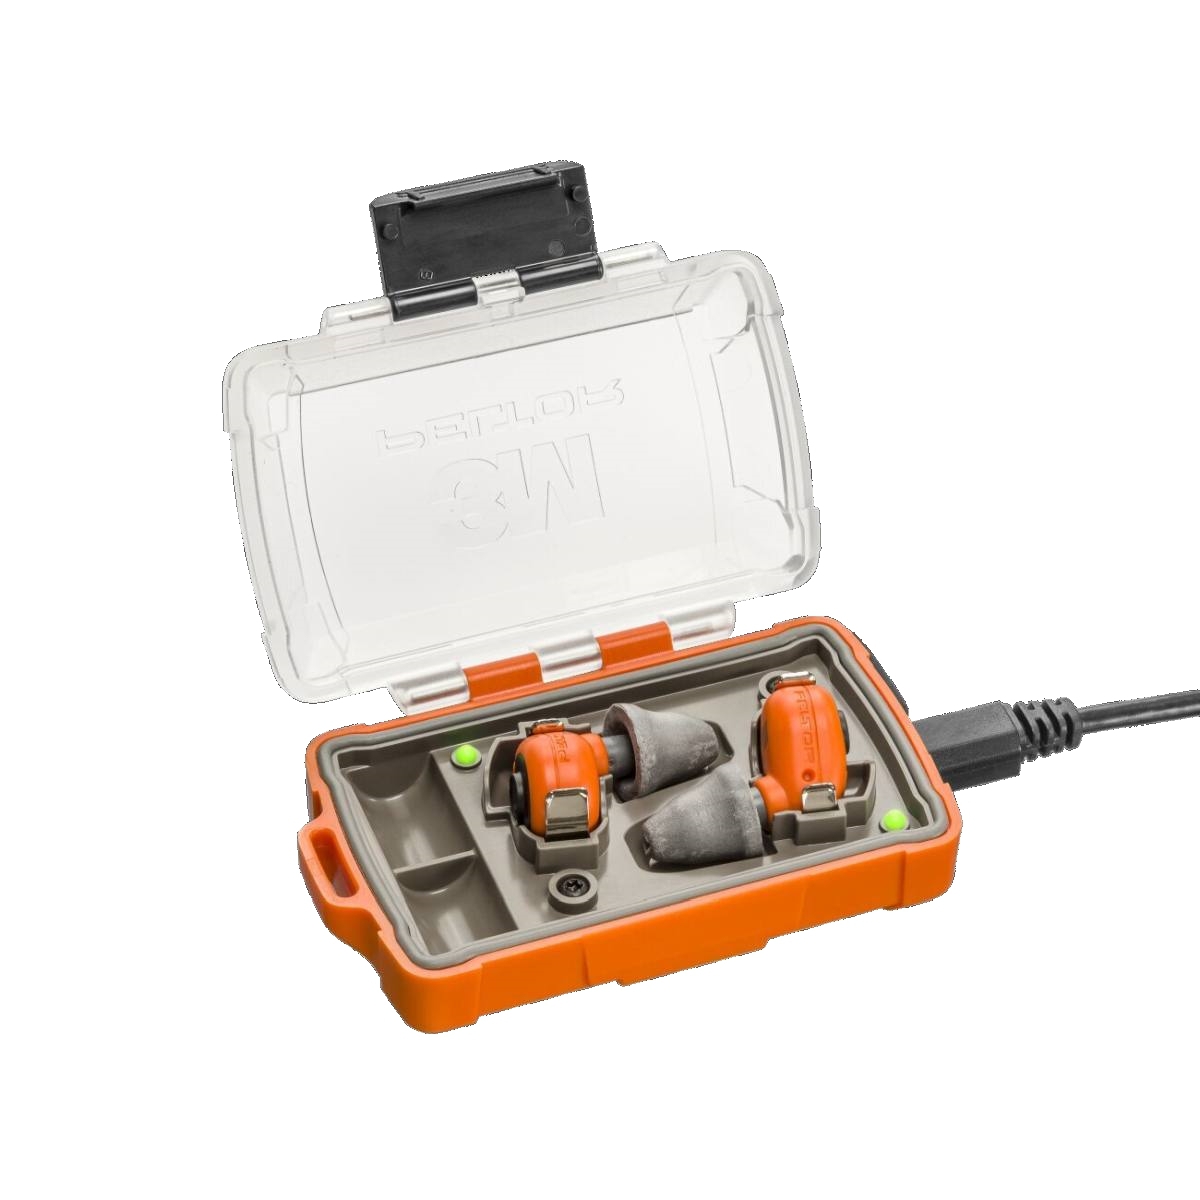 3M PELTOR EEP-100 EU Electronic earplugs orange, set: earplugs and charging station (with closed lid and USB ports) are IP-54 rated and waterproof